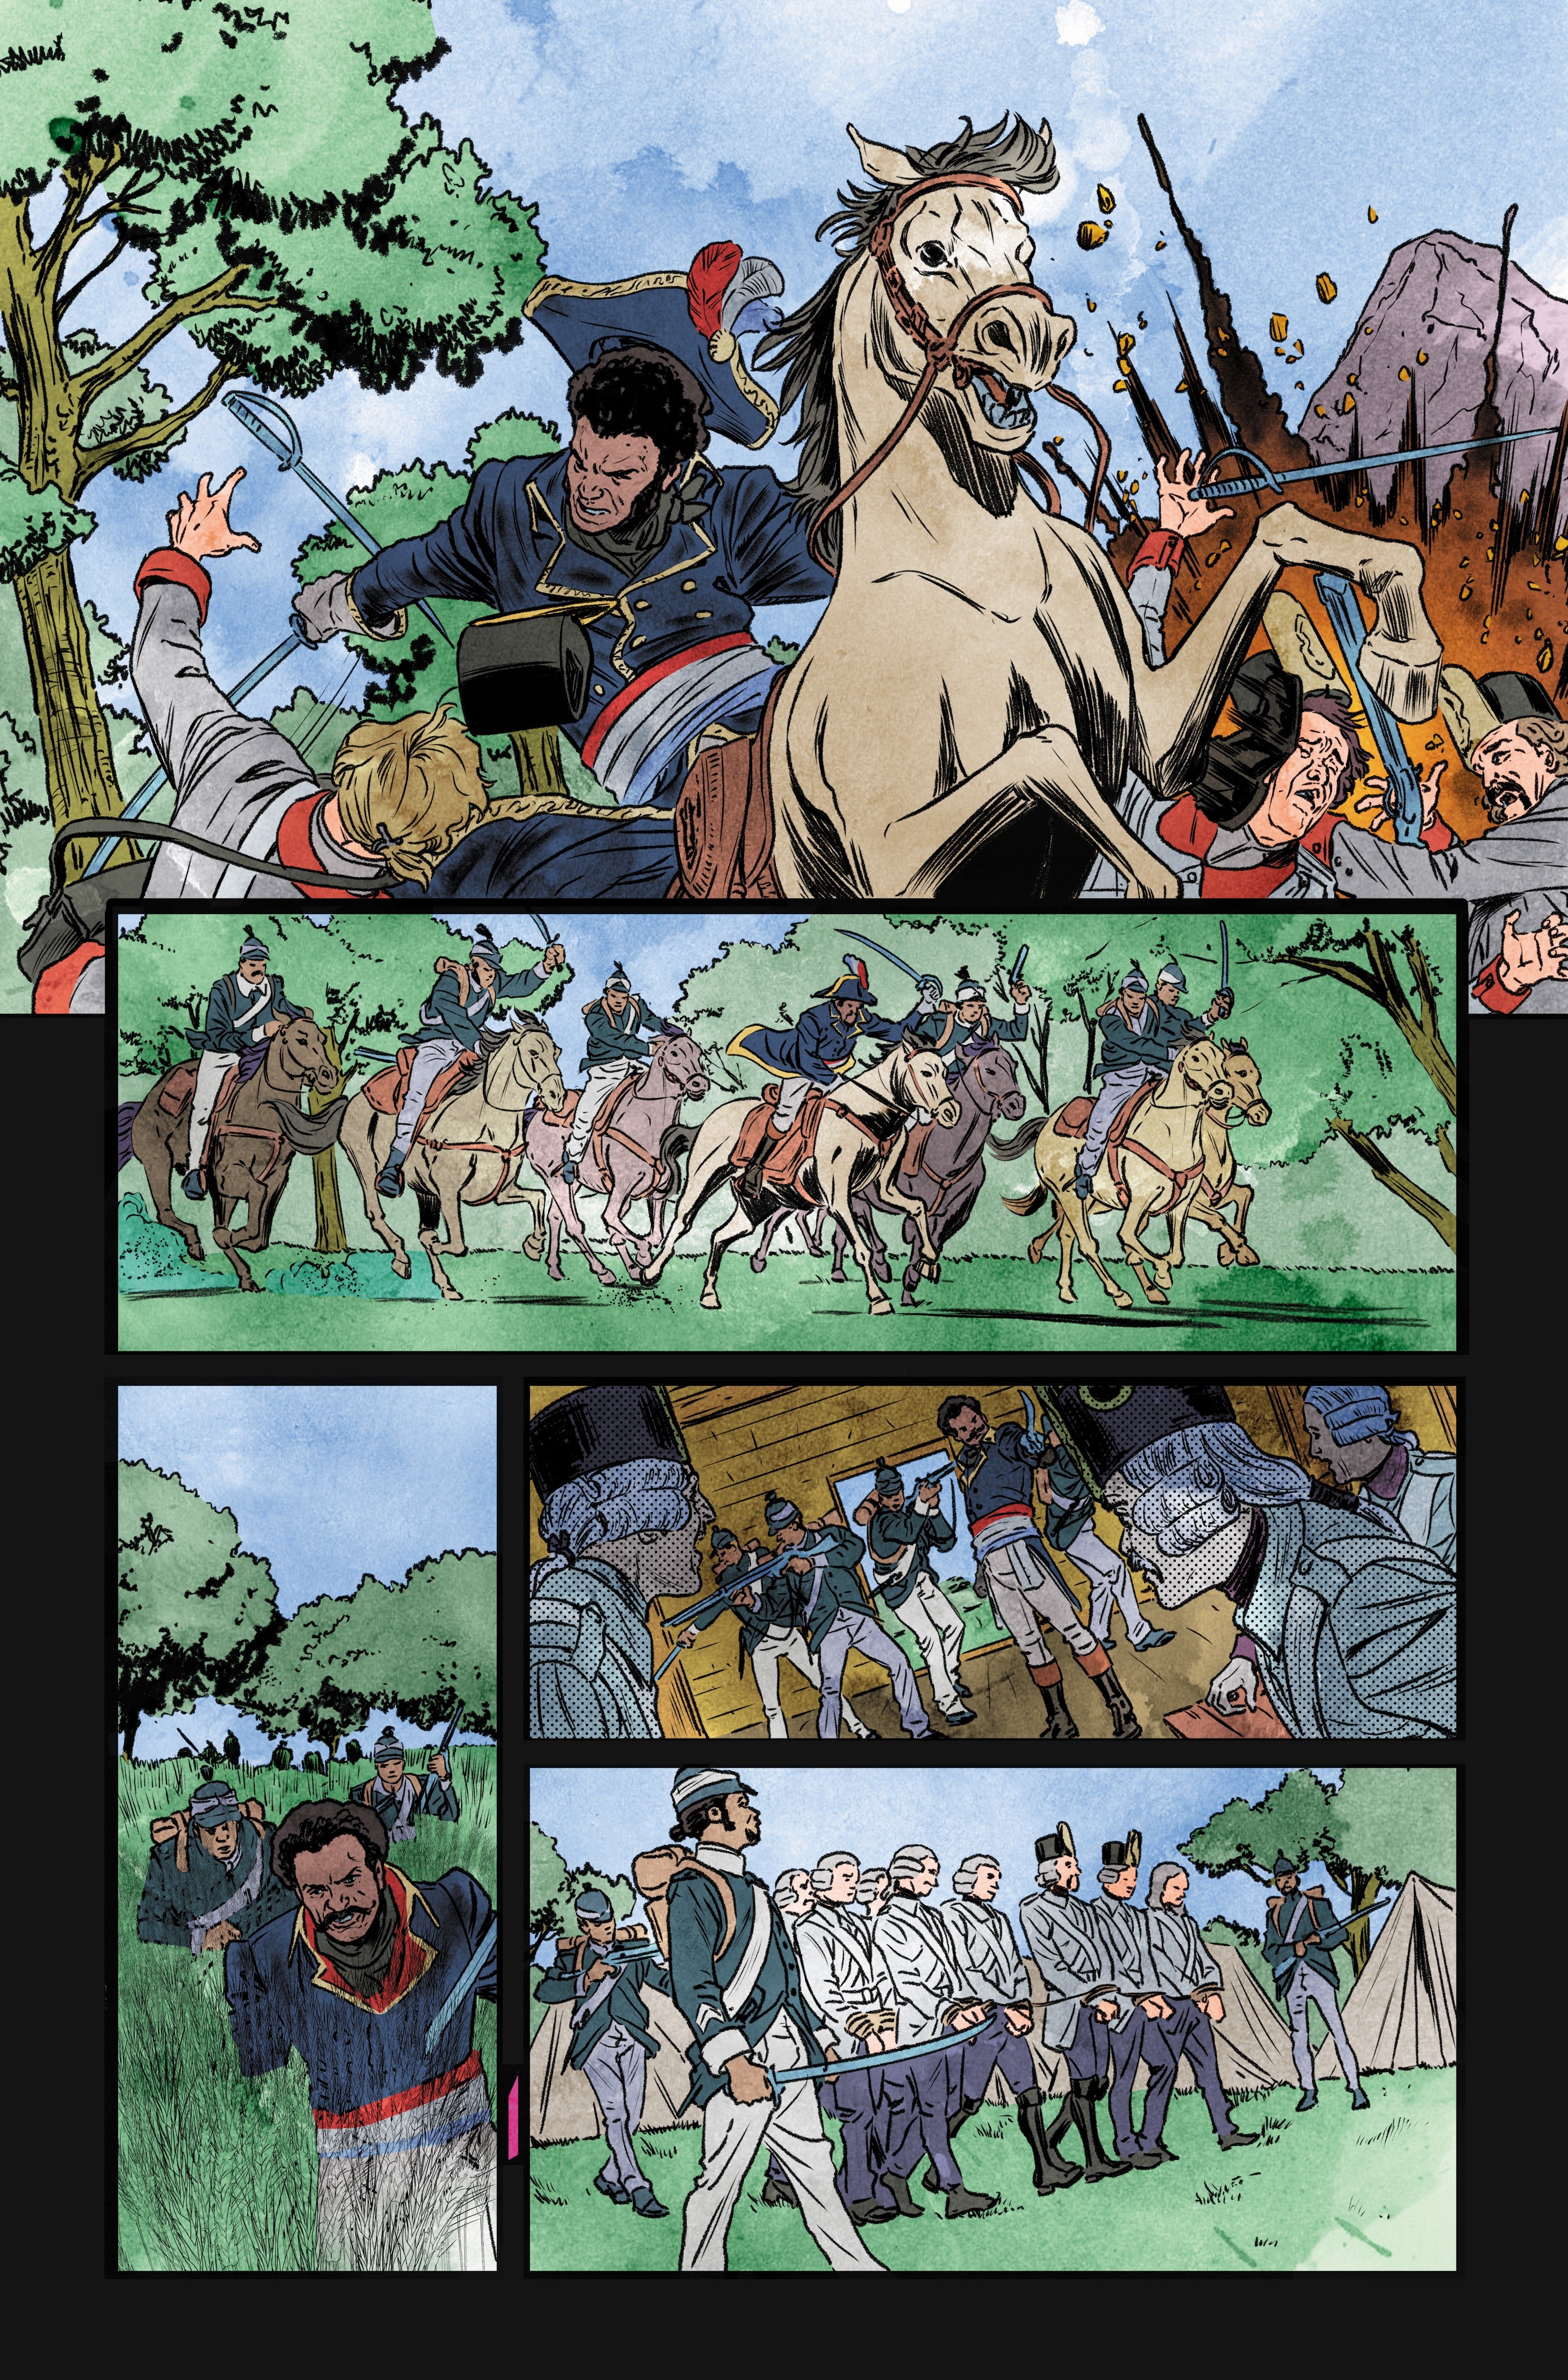 Interior page of a comic featuring a war scene with soldiers on horses